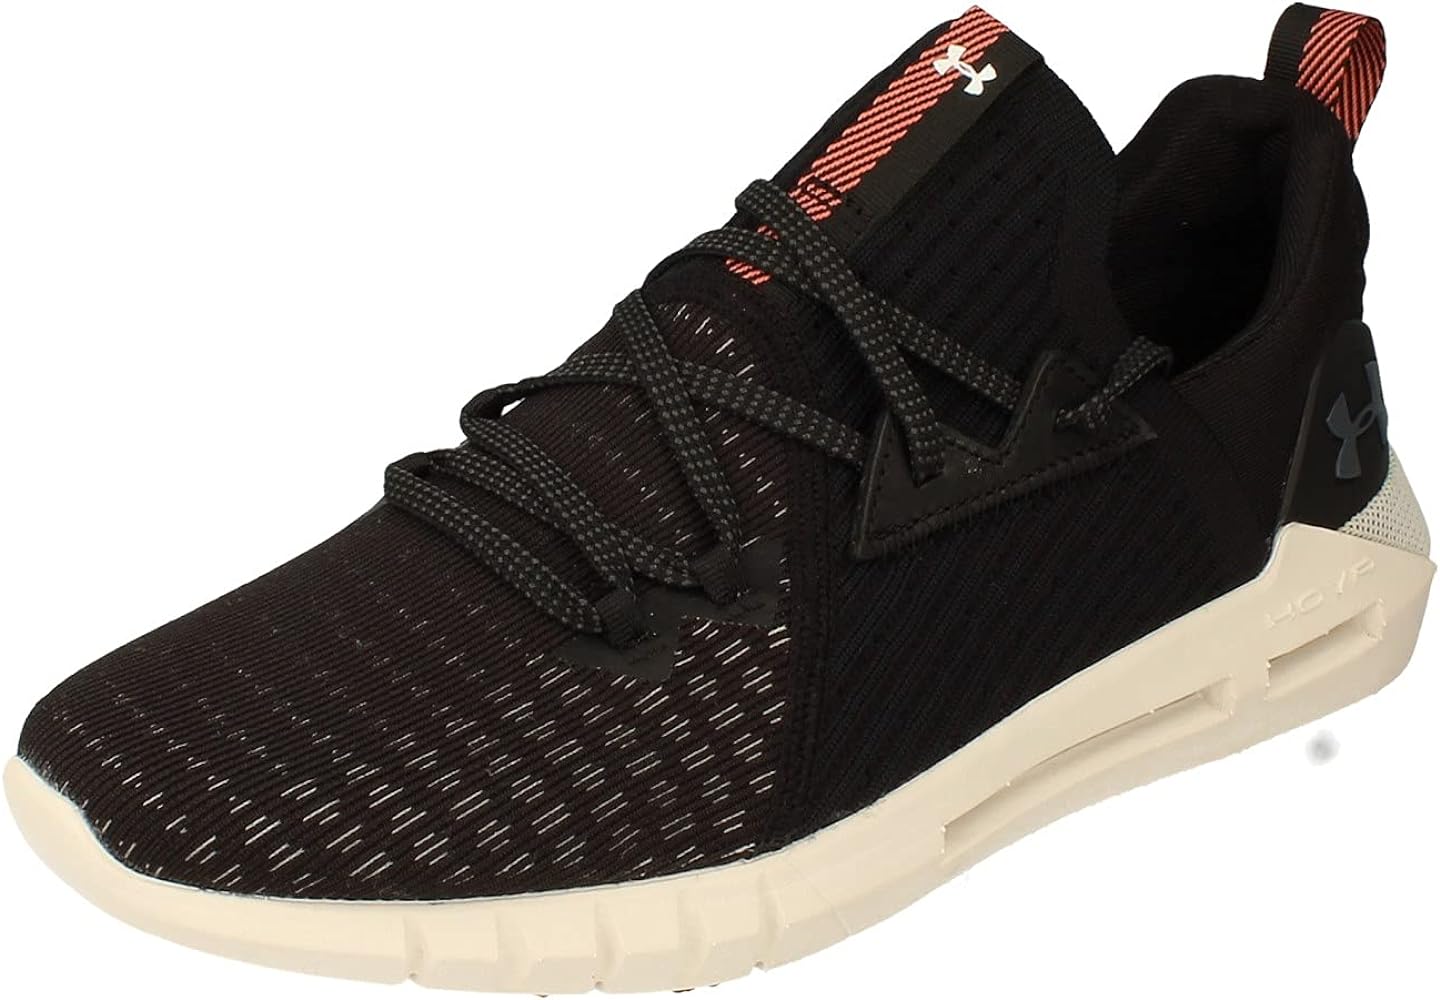 Are These New UA Hovr SLK Evo Shoes Worth The Hype